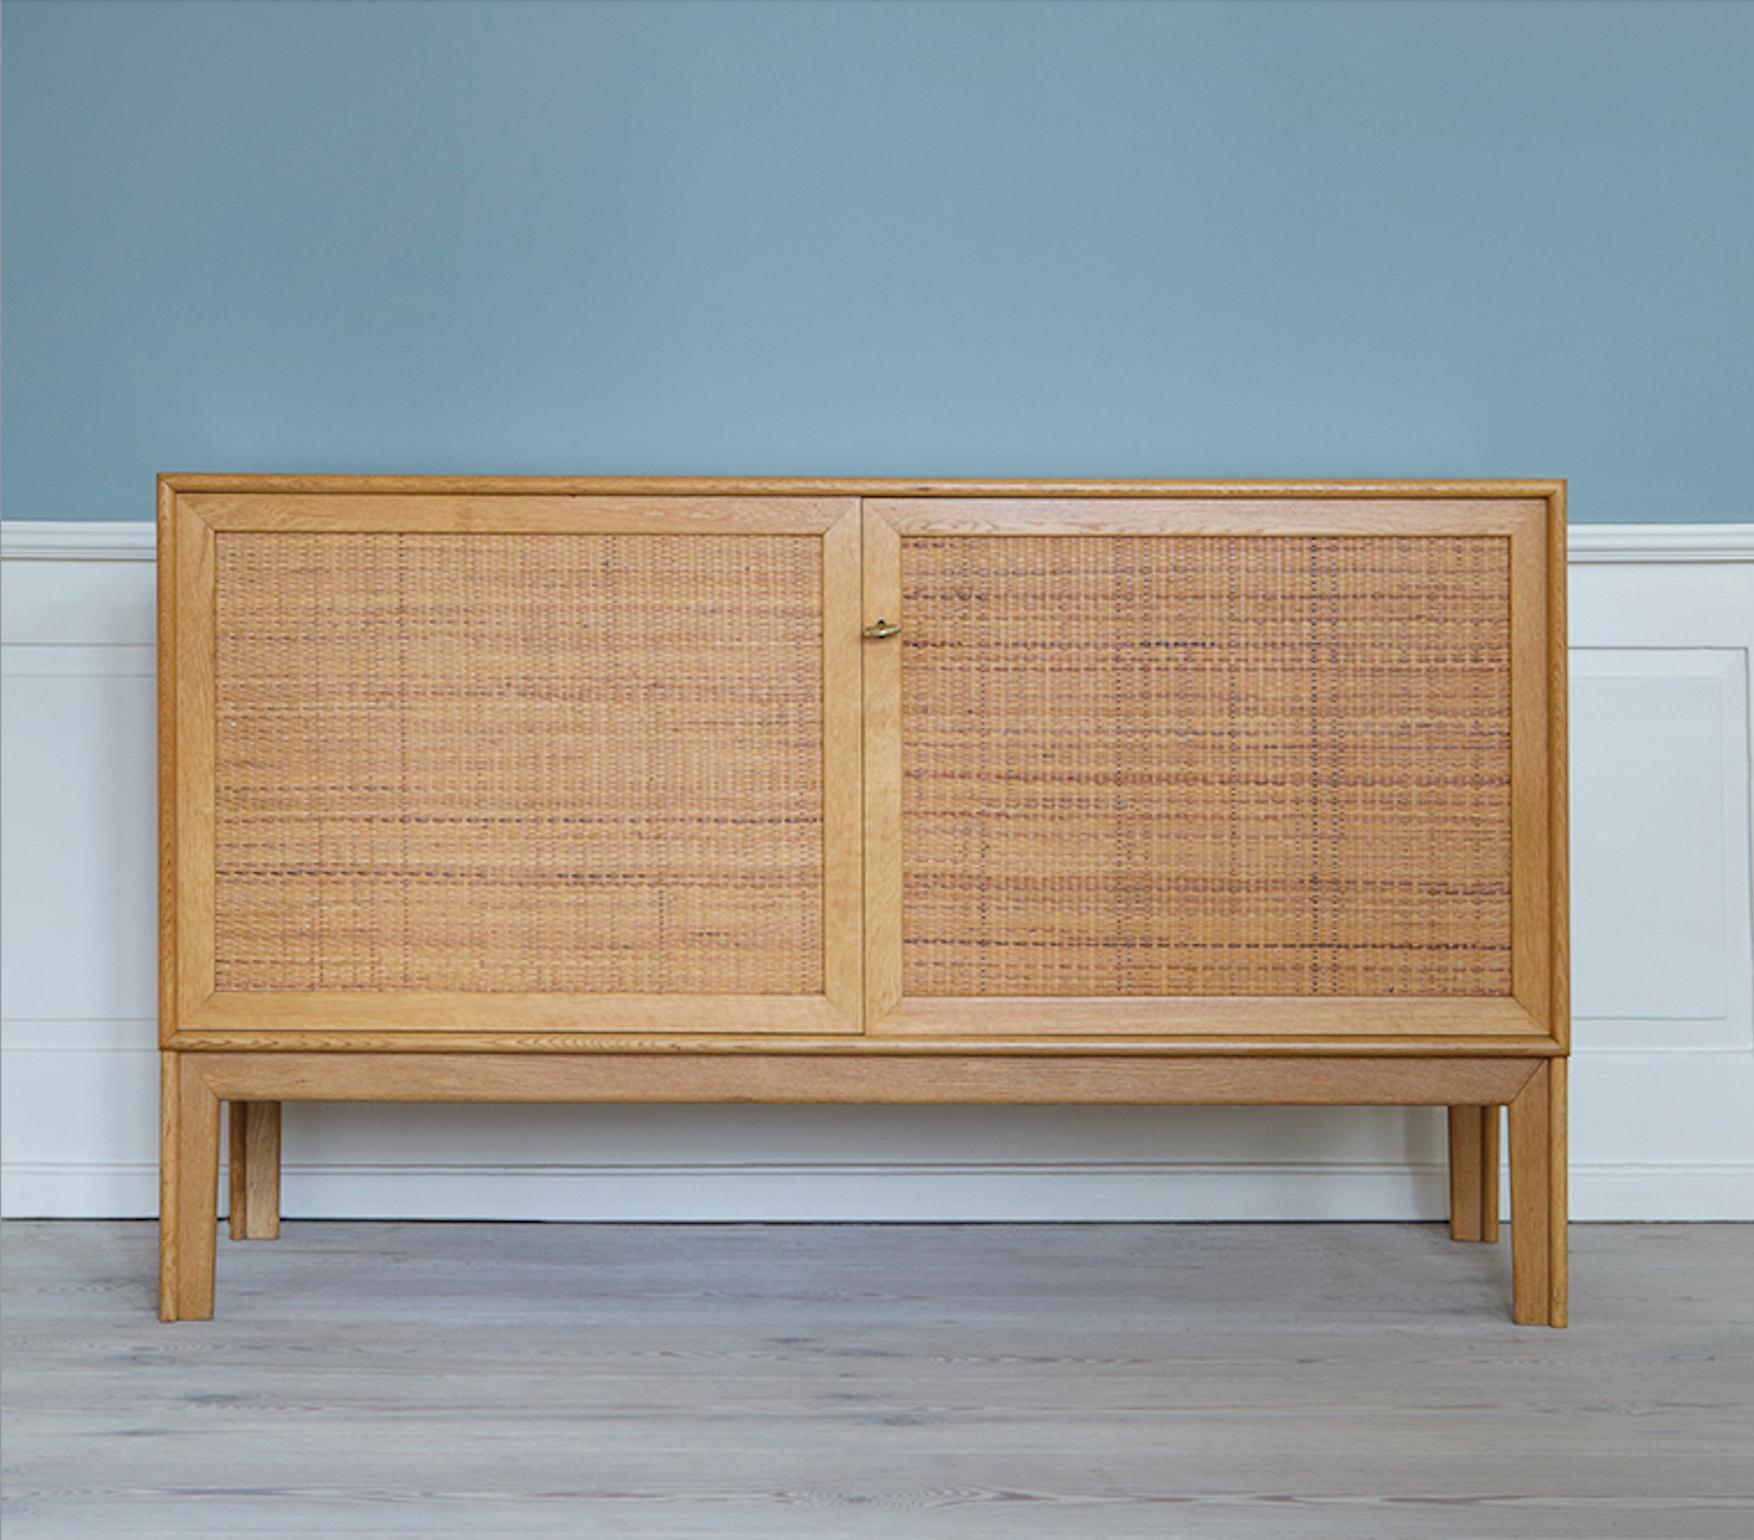 Alf Svensson
Sweden 1950s

A sideboard with two doors in oak and cane.

H 72 x W 120 x D 45 cm